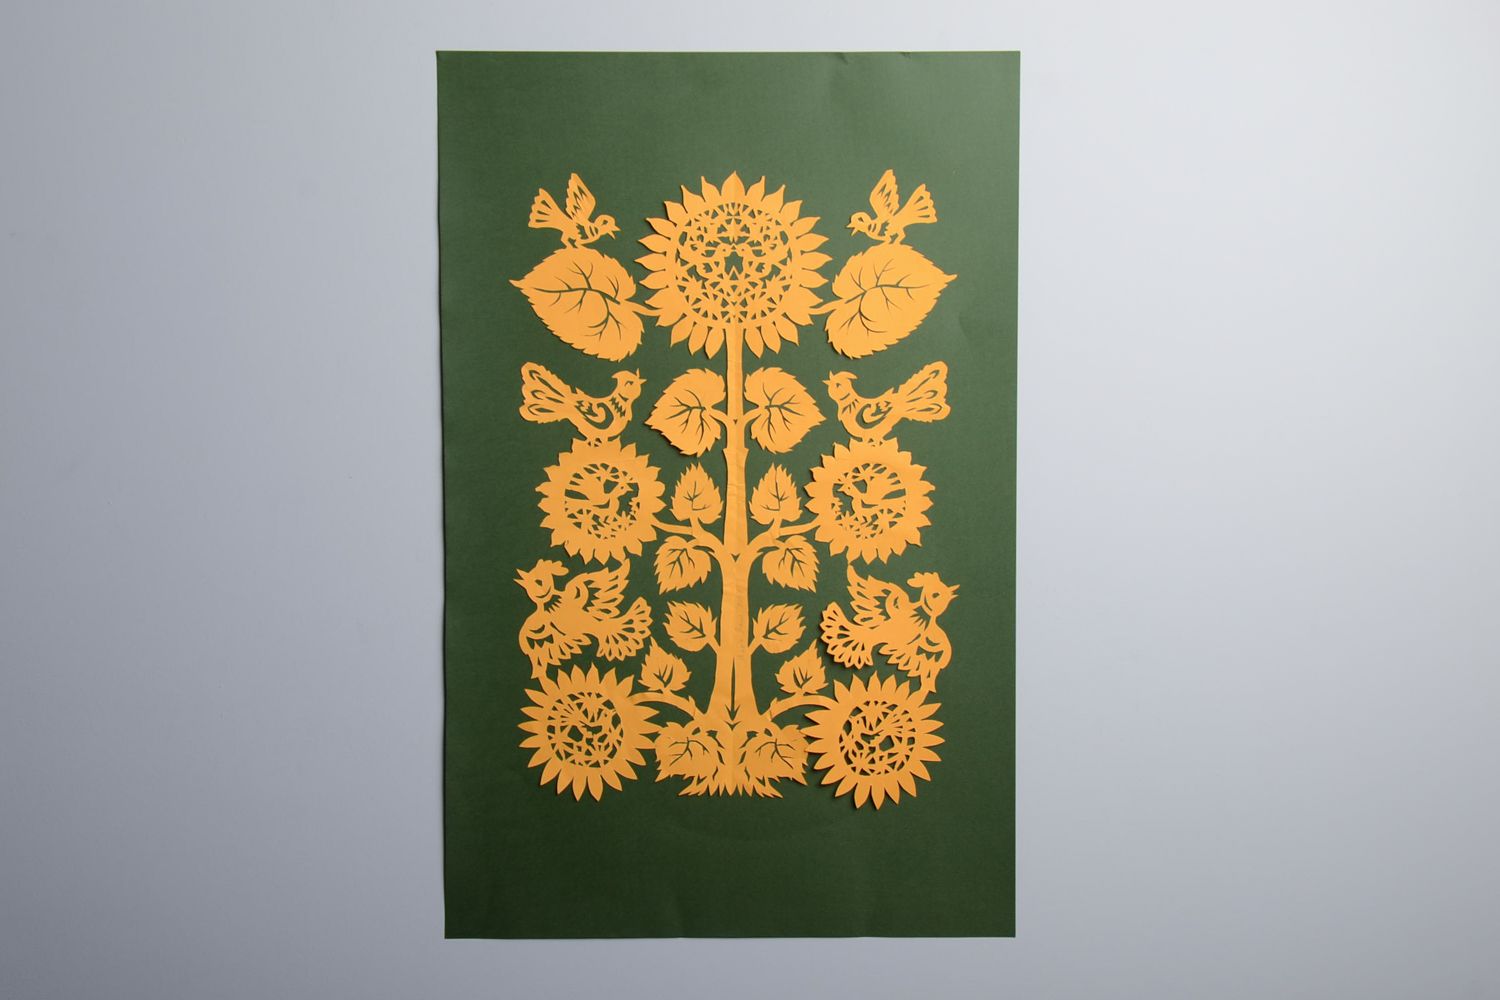 Paper cut out picture vitinanka on green background Tree of Life photo 1